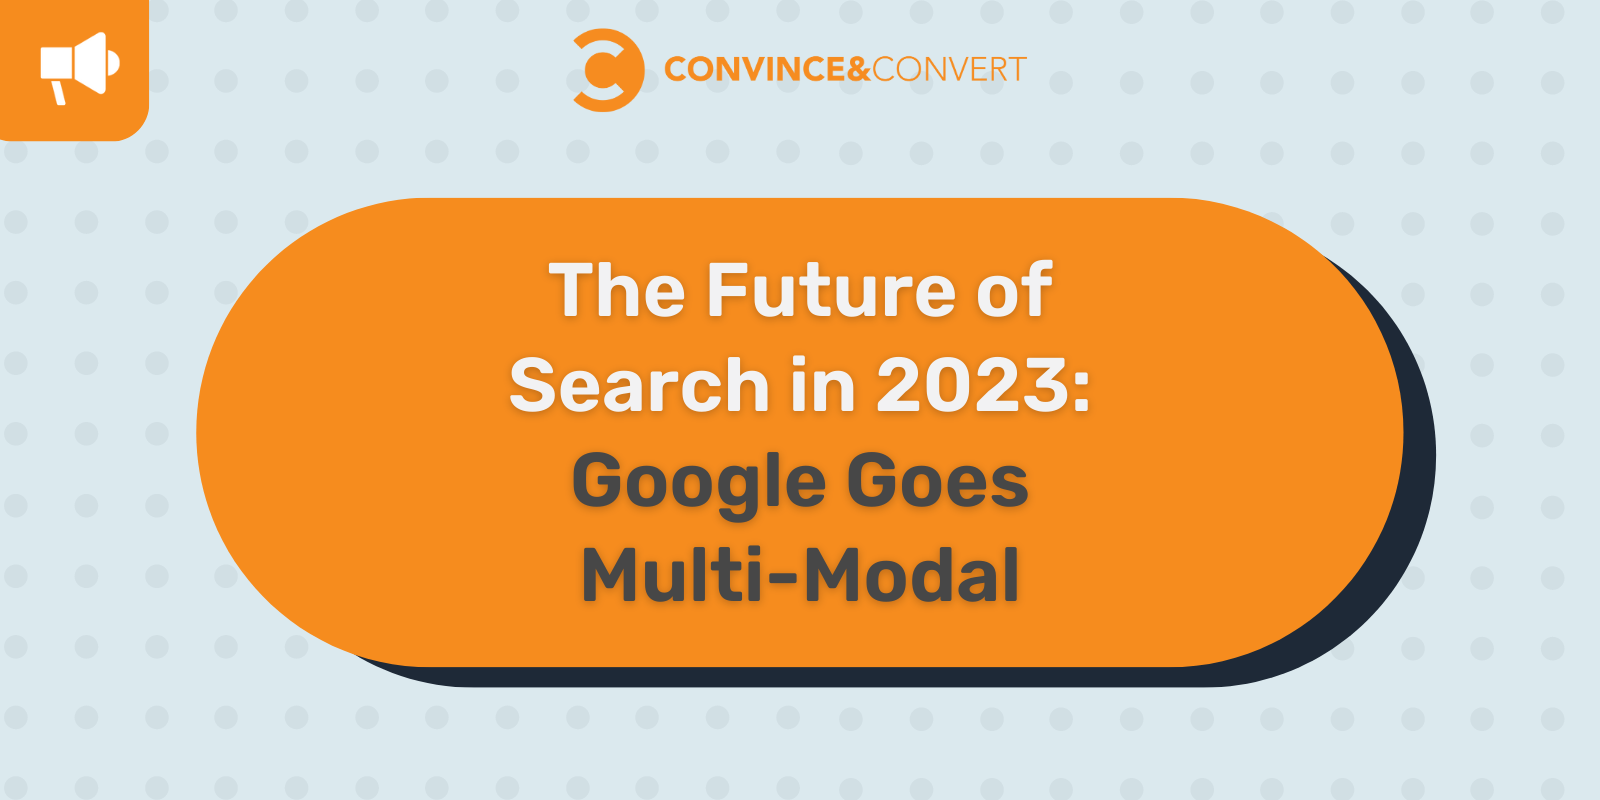 The Future of Search in 2023 Google Goes Multi-Modal